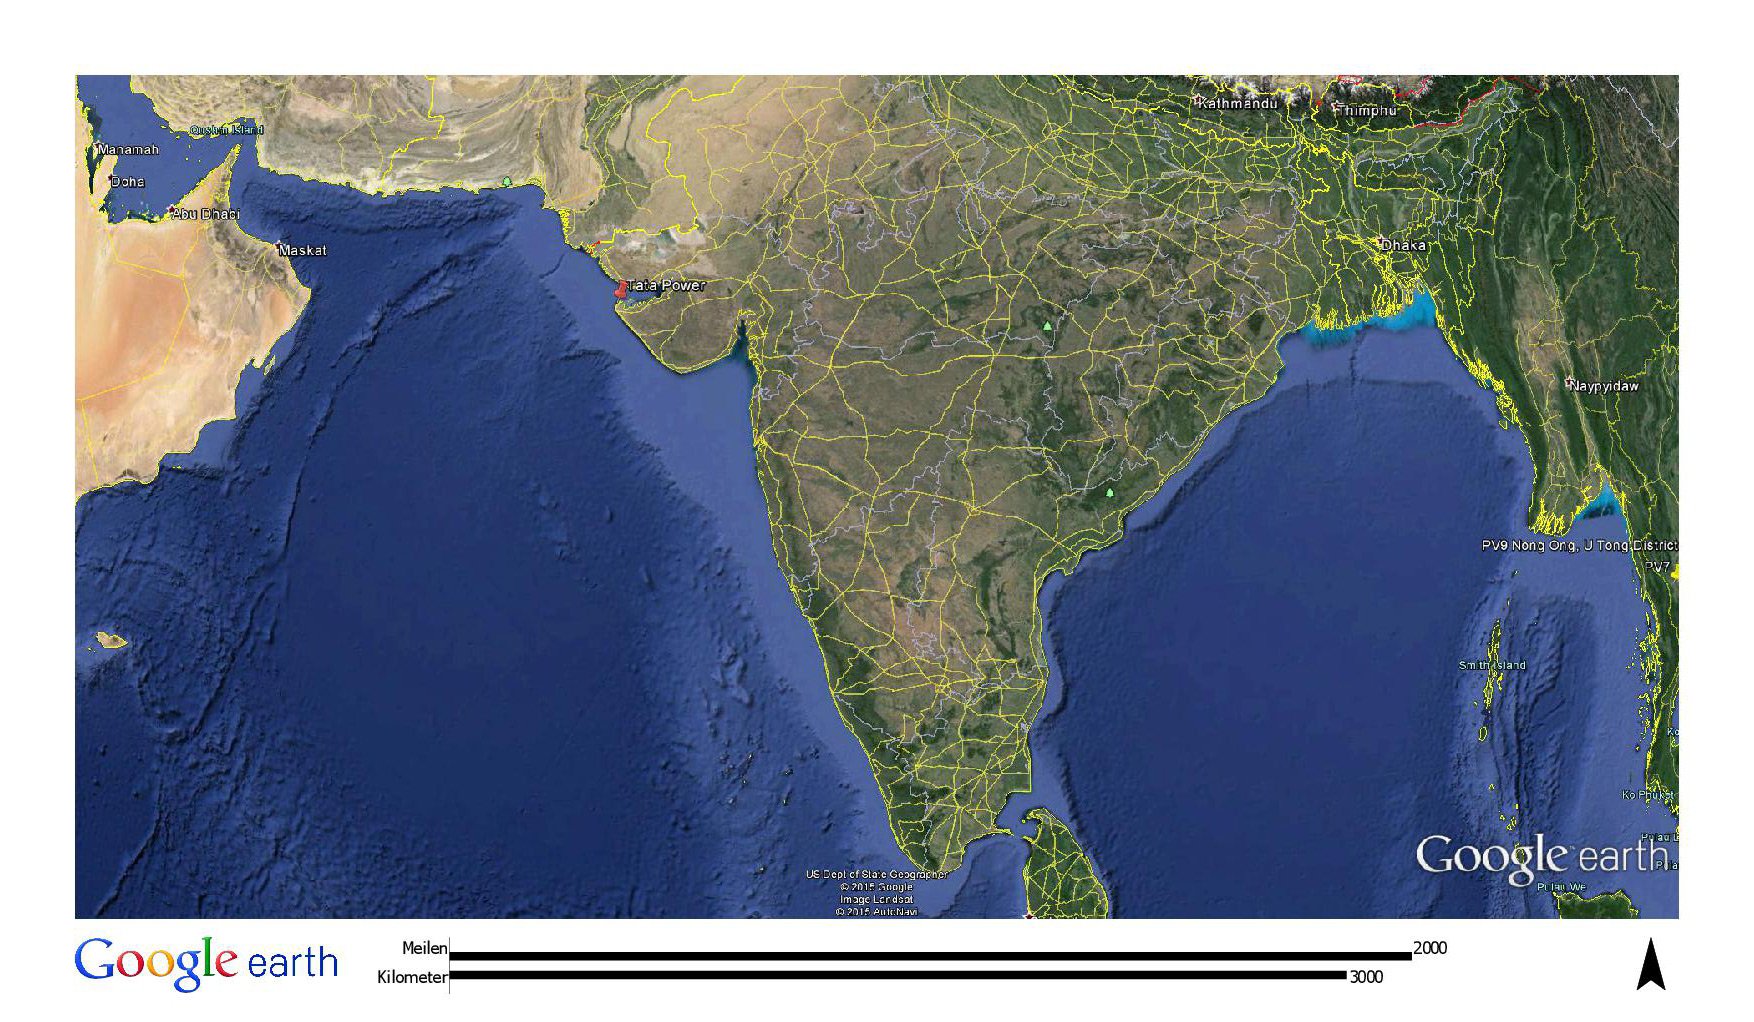 The PV system in India is located 100 meters from the ocean.